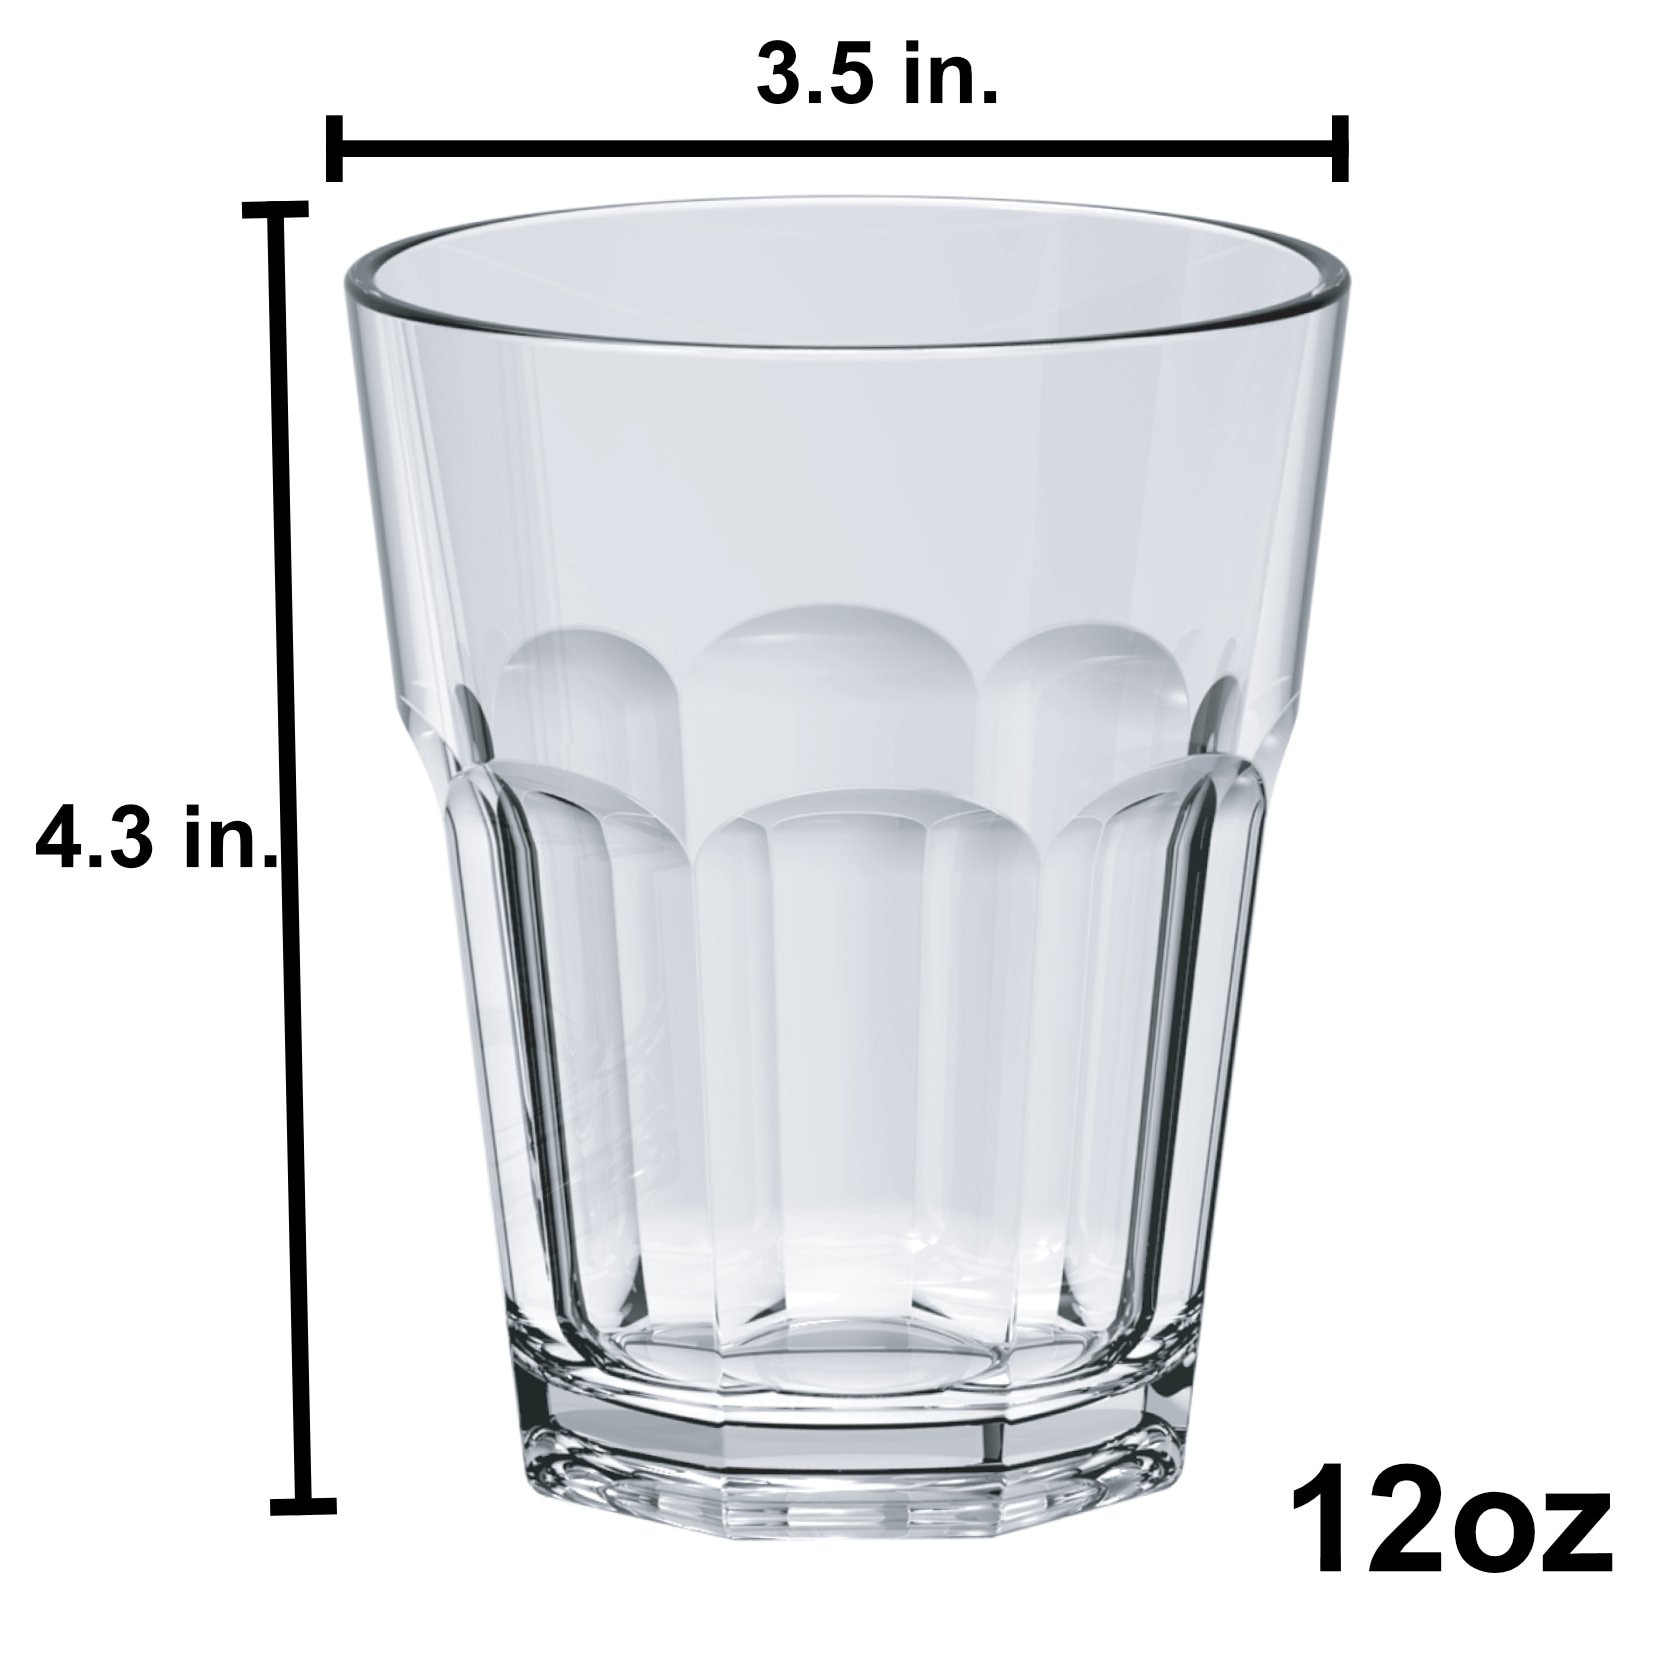 https://ak1.ostkcdn.com/images/products/is/images/direct/111436f11c856ded5f3dc9aa1ece54d18de19738/Acrylic-Drinking-Glasses-By-DWorks-Dishwasher-Safe-Set-Of-6.jpg